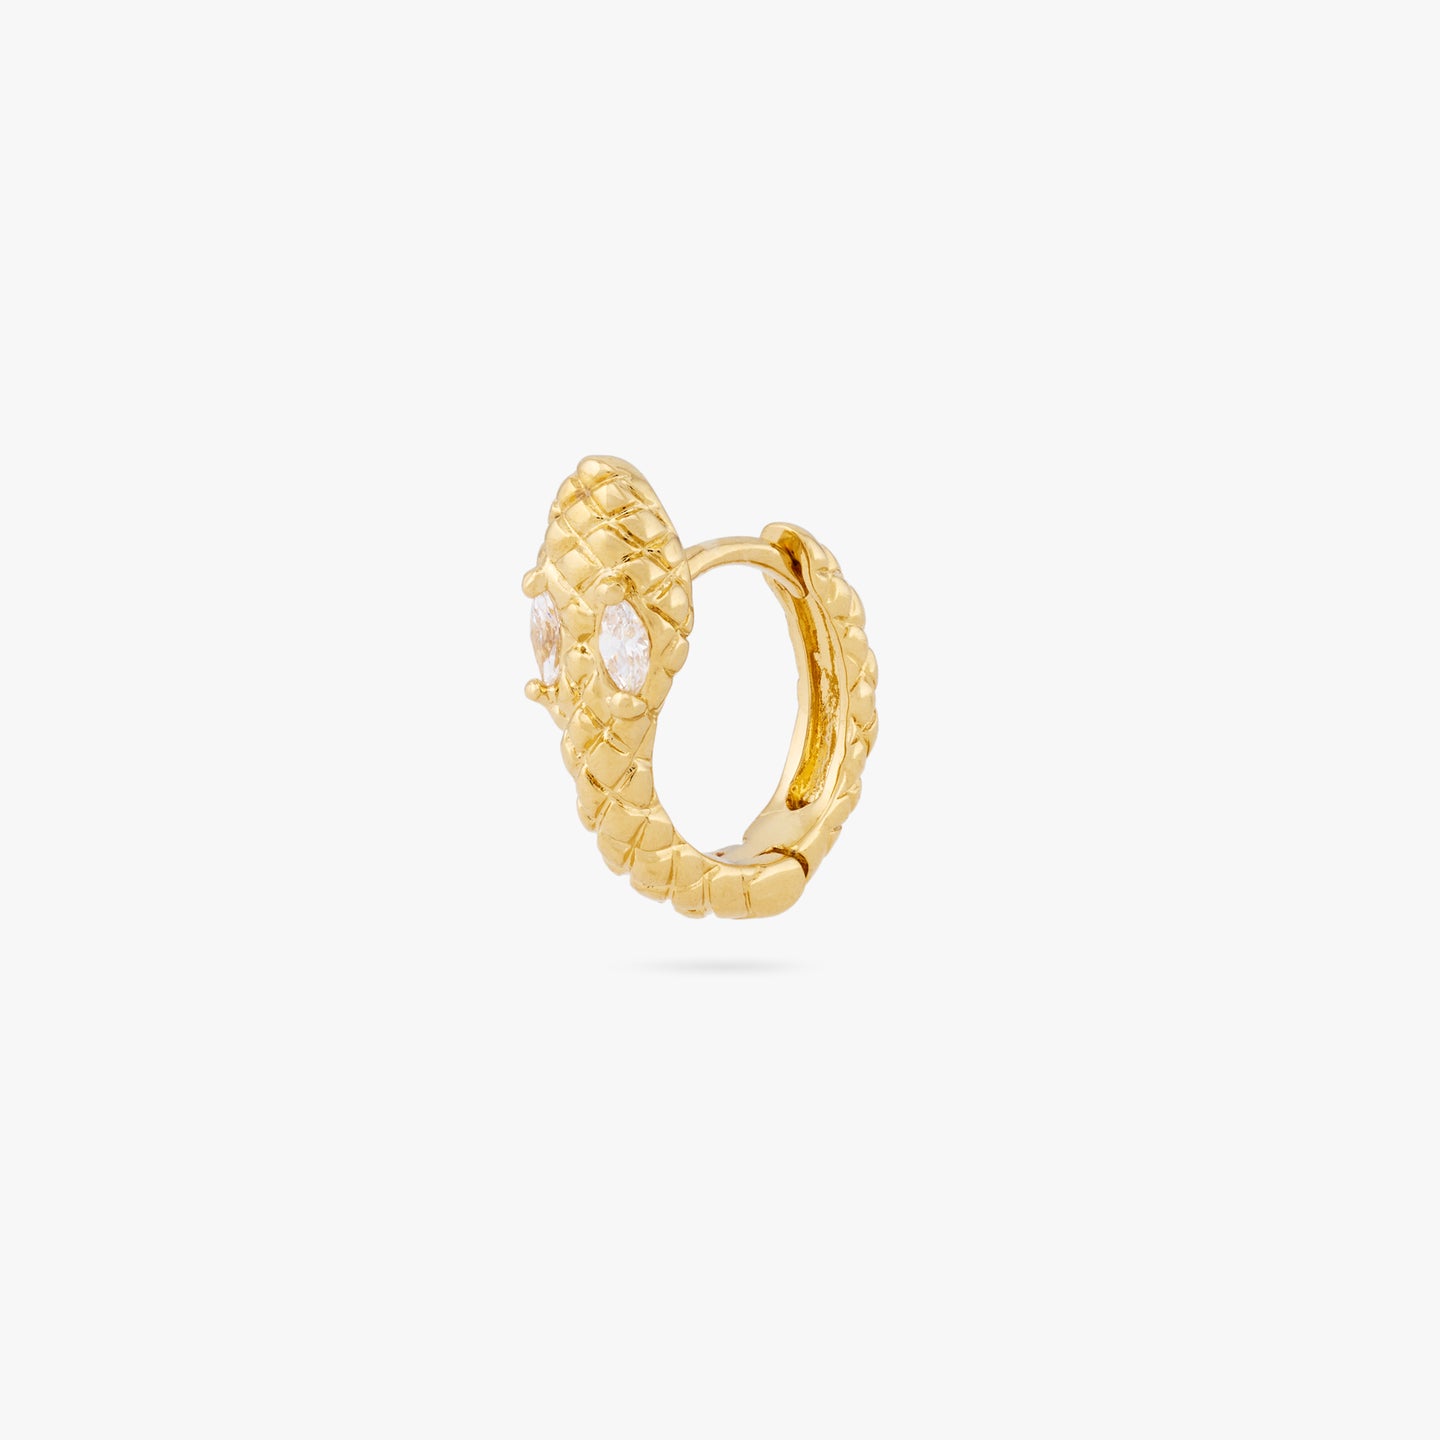 This is a gold serpent shaped huggie earring with clear CZ eyes color:null|gold